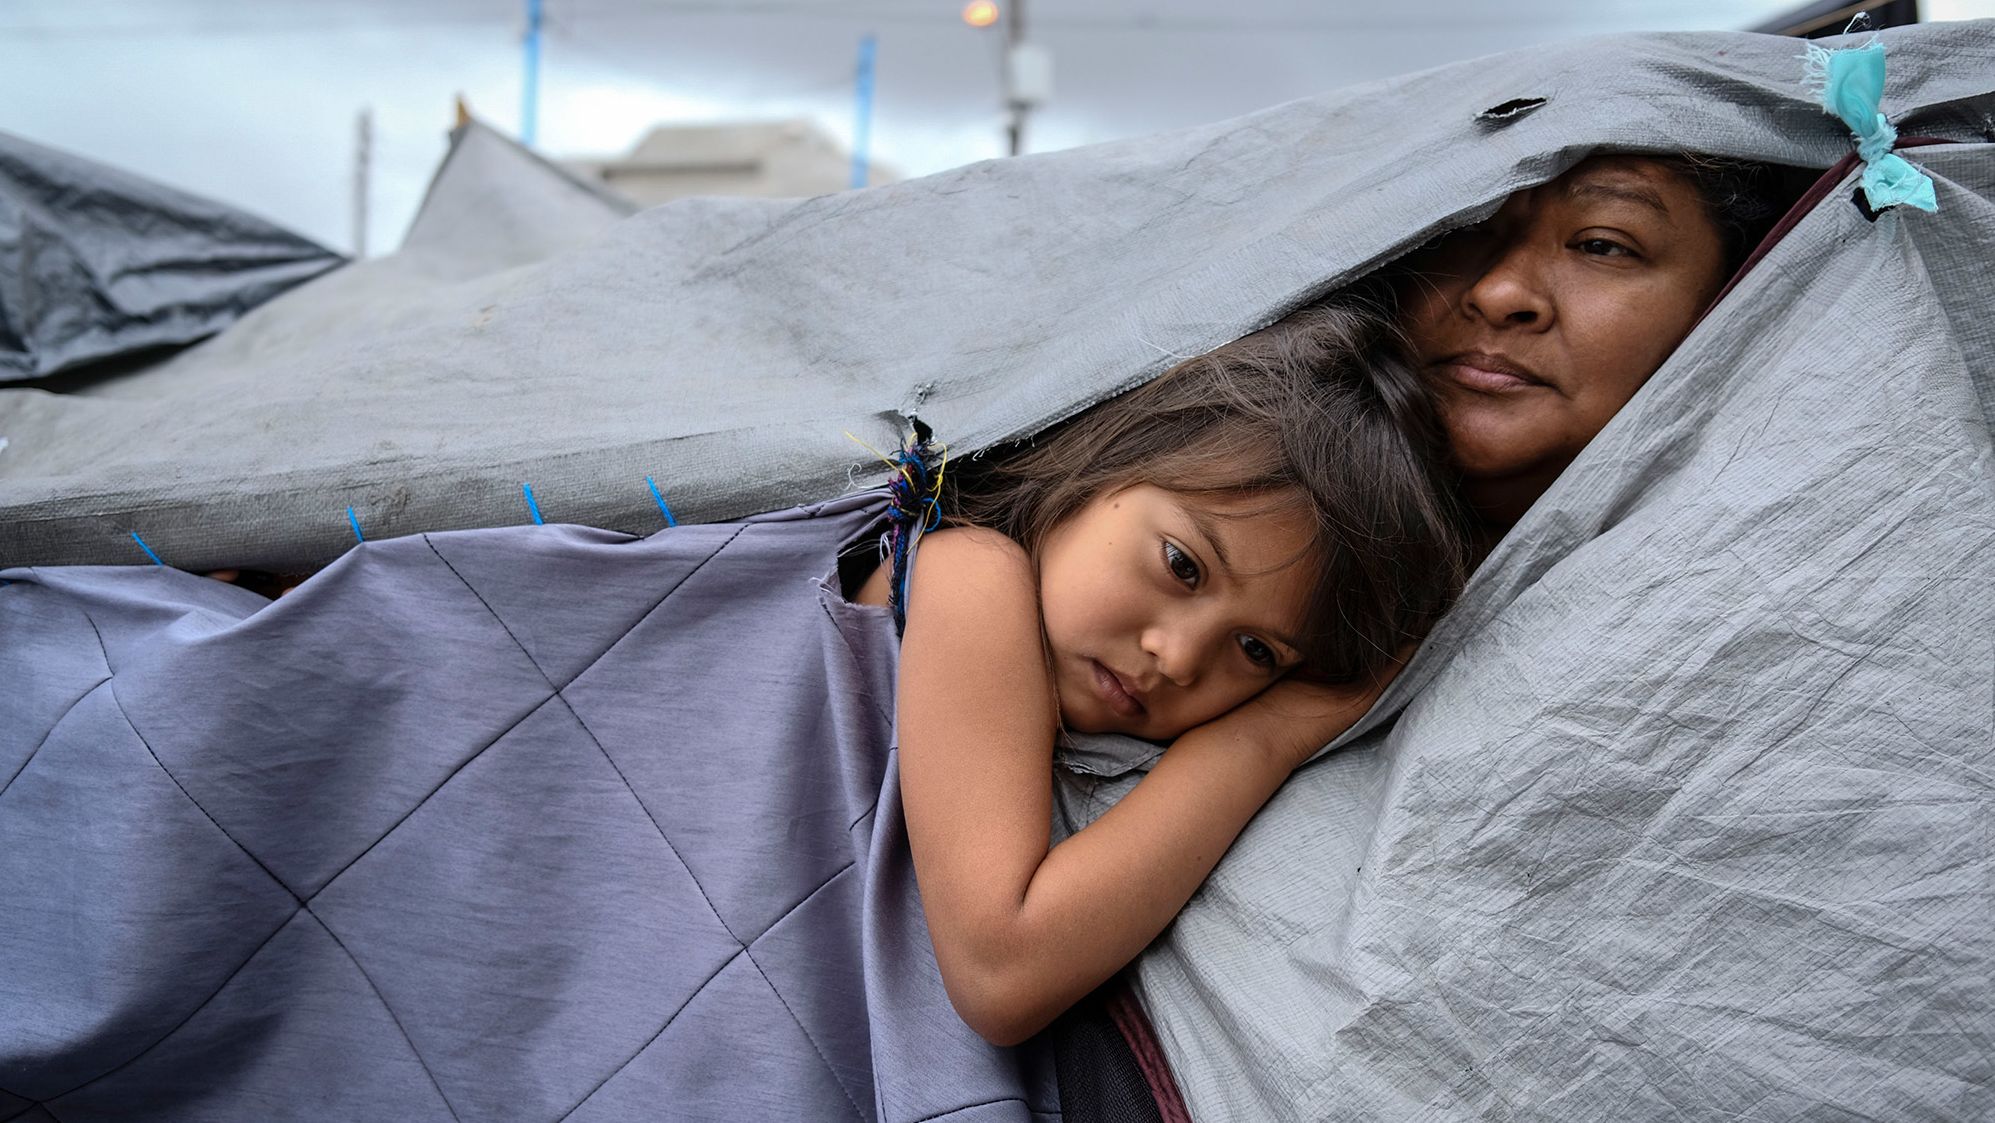 <strong>Toya Sarno Jordan, based in Mexico City, Mexico:</strong> Kami, 5, and her aunt Mariana, from Honduras, are listening to a discussion about hygiene norms at a makeshift migrant camp at the El Chaparral port of entry with the US in Tijuana, Mexico. The camp began to form after <a href="https://edition.cnn.com/2020/03/20/politics/us-mexico-border/index.html" target="_blank">the US closed its land borders in March 2020</a> due to Covid-19 and has hosted up to around 2000 people from Central and Latin America.<br /> <br />At the time I took the photo, the camp was open to the press and I was able to spend many hours walking around and talking to people, which gave me access to more intimate moments in their daily lives.<br /> <br />What stands out to me is the grace that is found in moments of pause and silence within greater contexts of conflict. I find that in all coverage where there might be explicit violence, uncertainty and insecurity, there is equally beauty and light that define us as a global community.